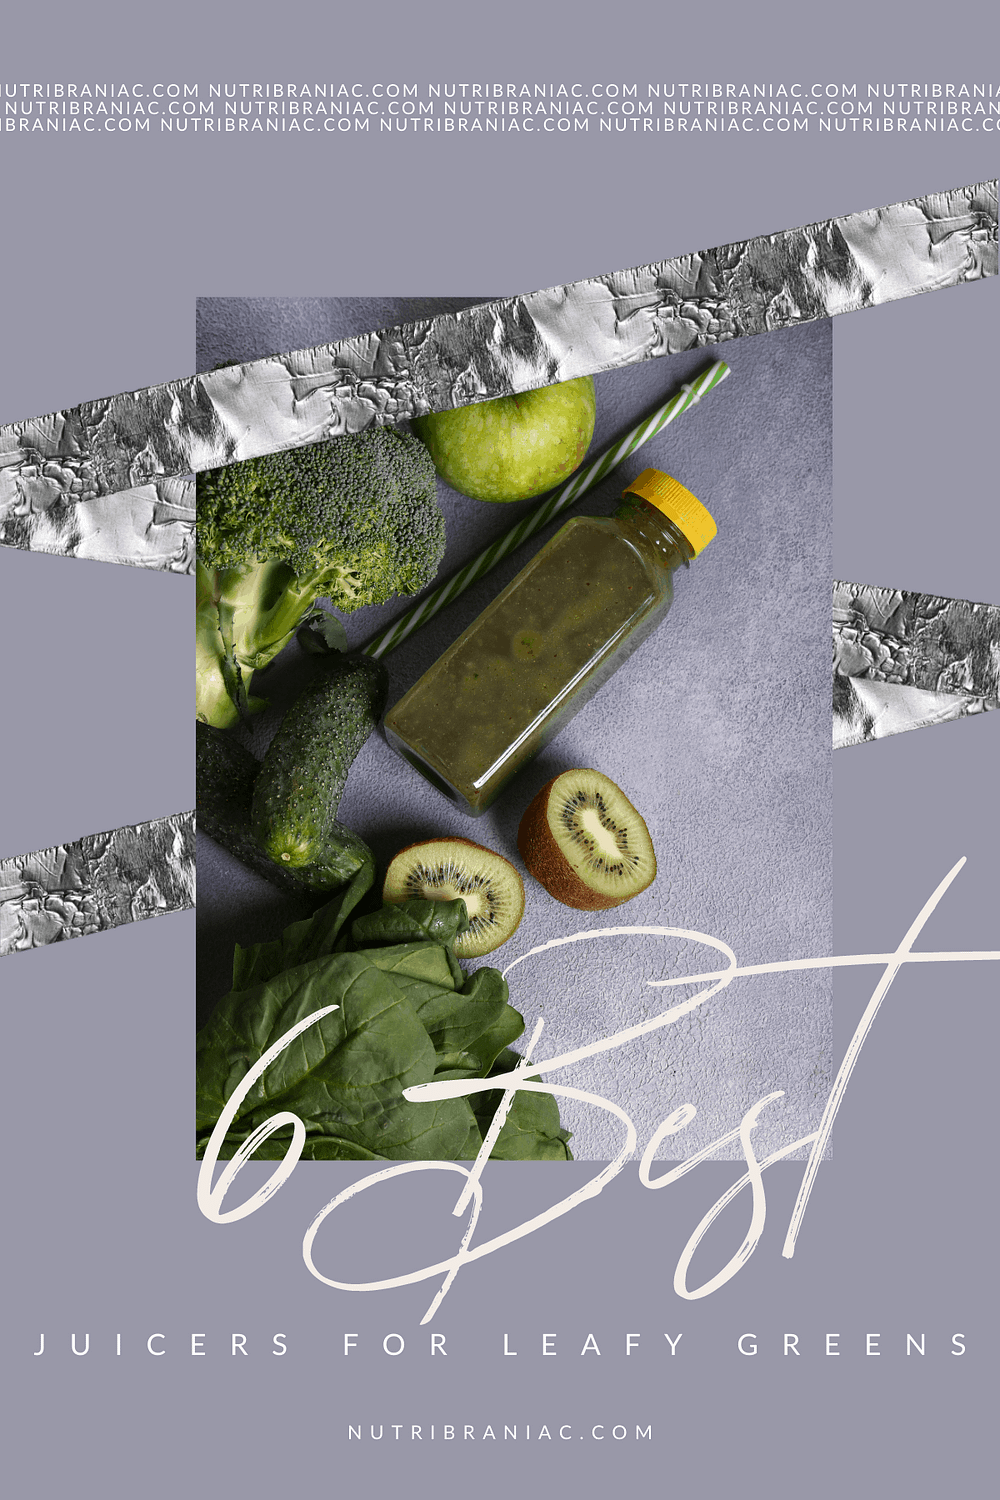 Green juice on a cement table next to green vegetables with words "6 Best Juicers for Leafy Greens"